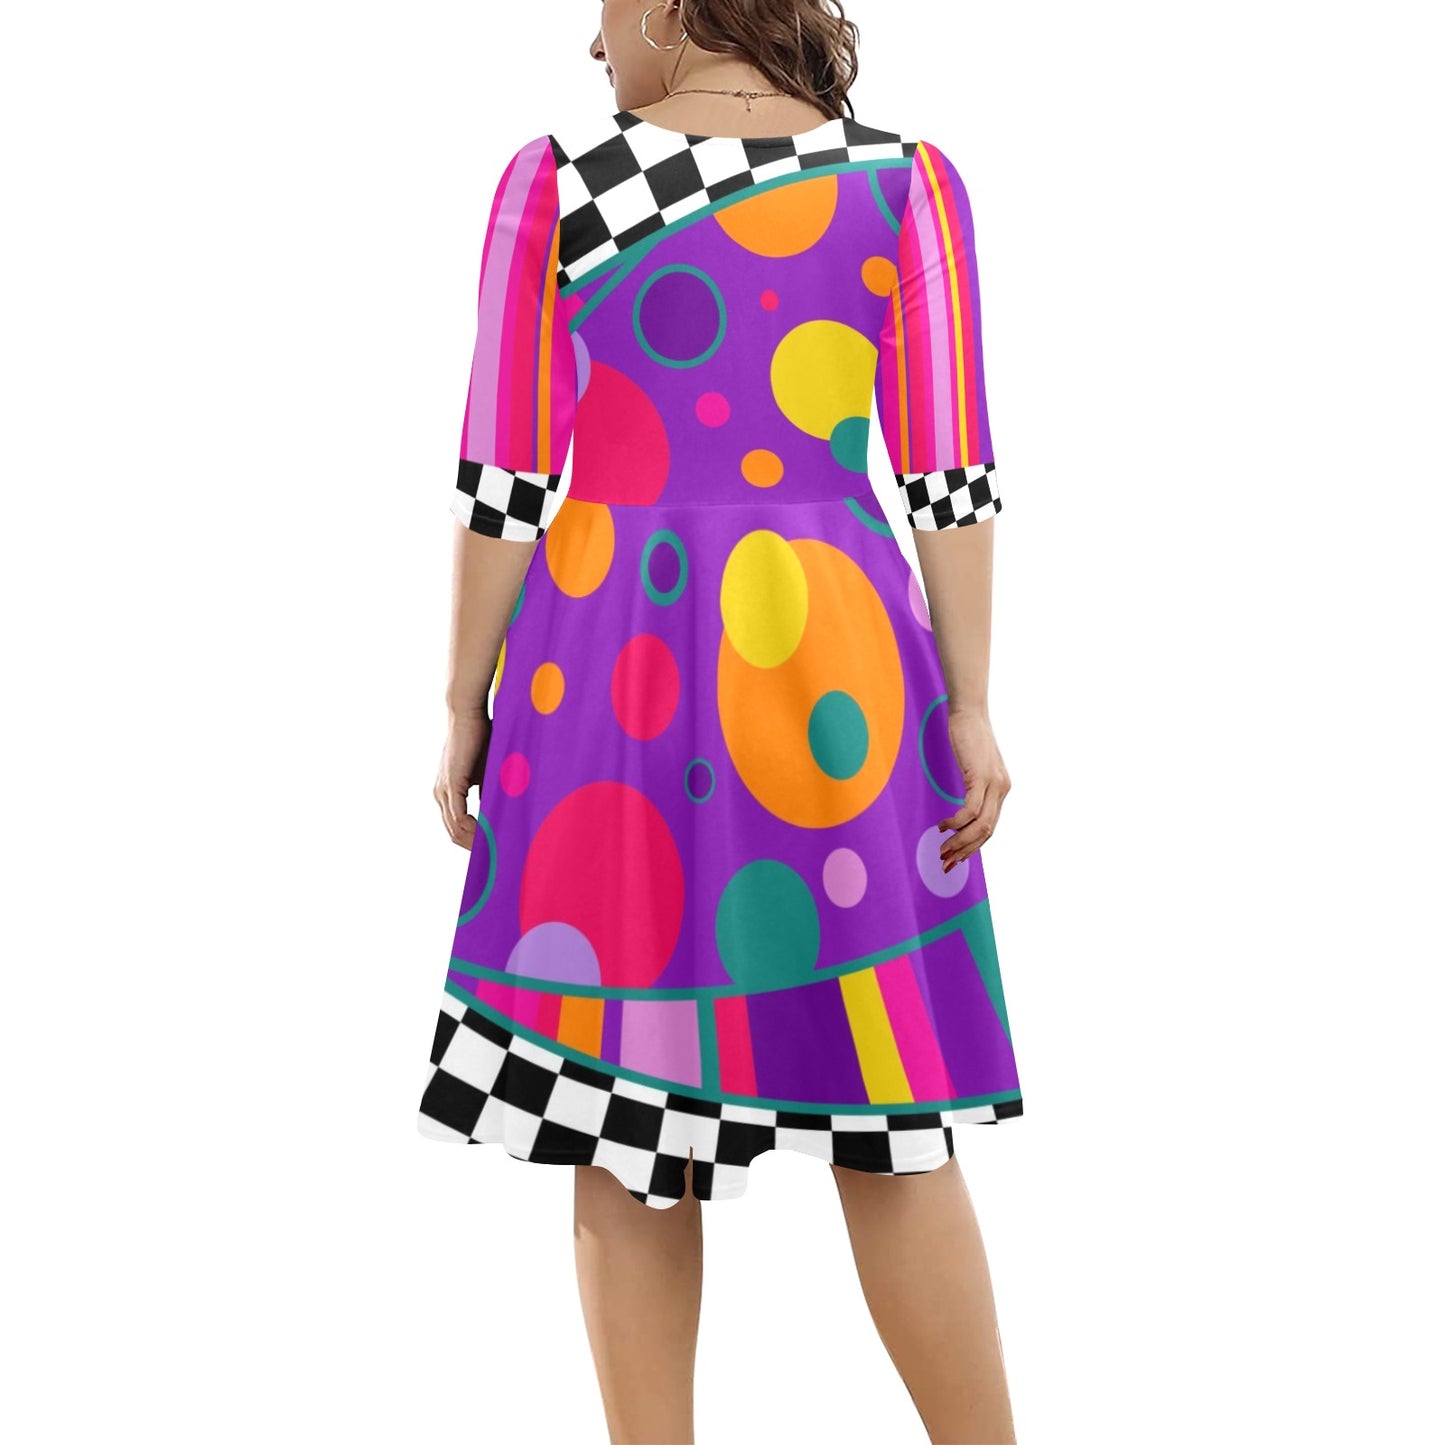 Colourful dress with sleeves for clowns and balloon twisters